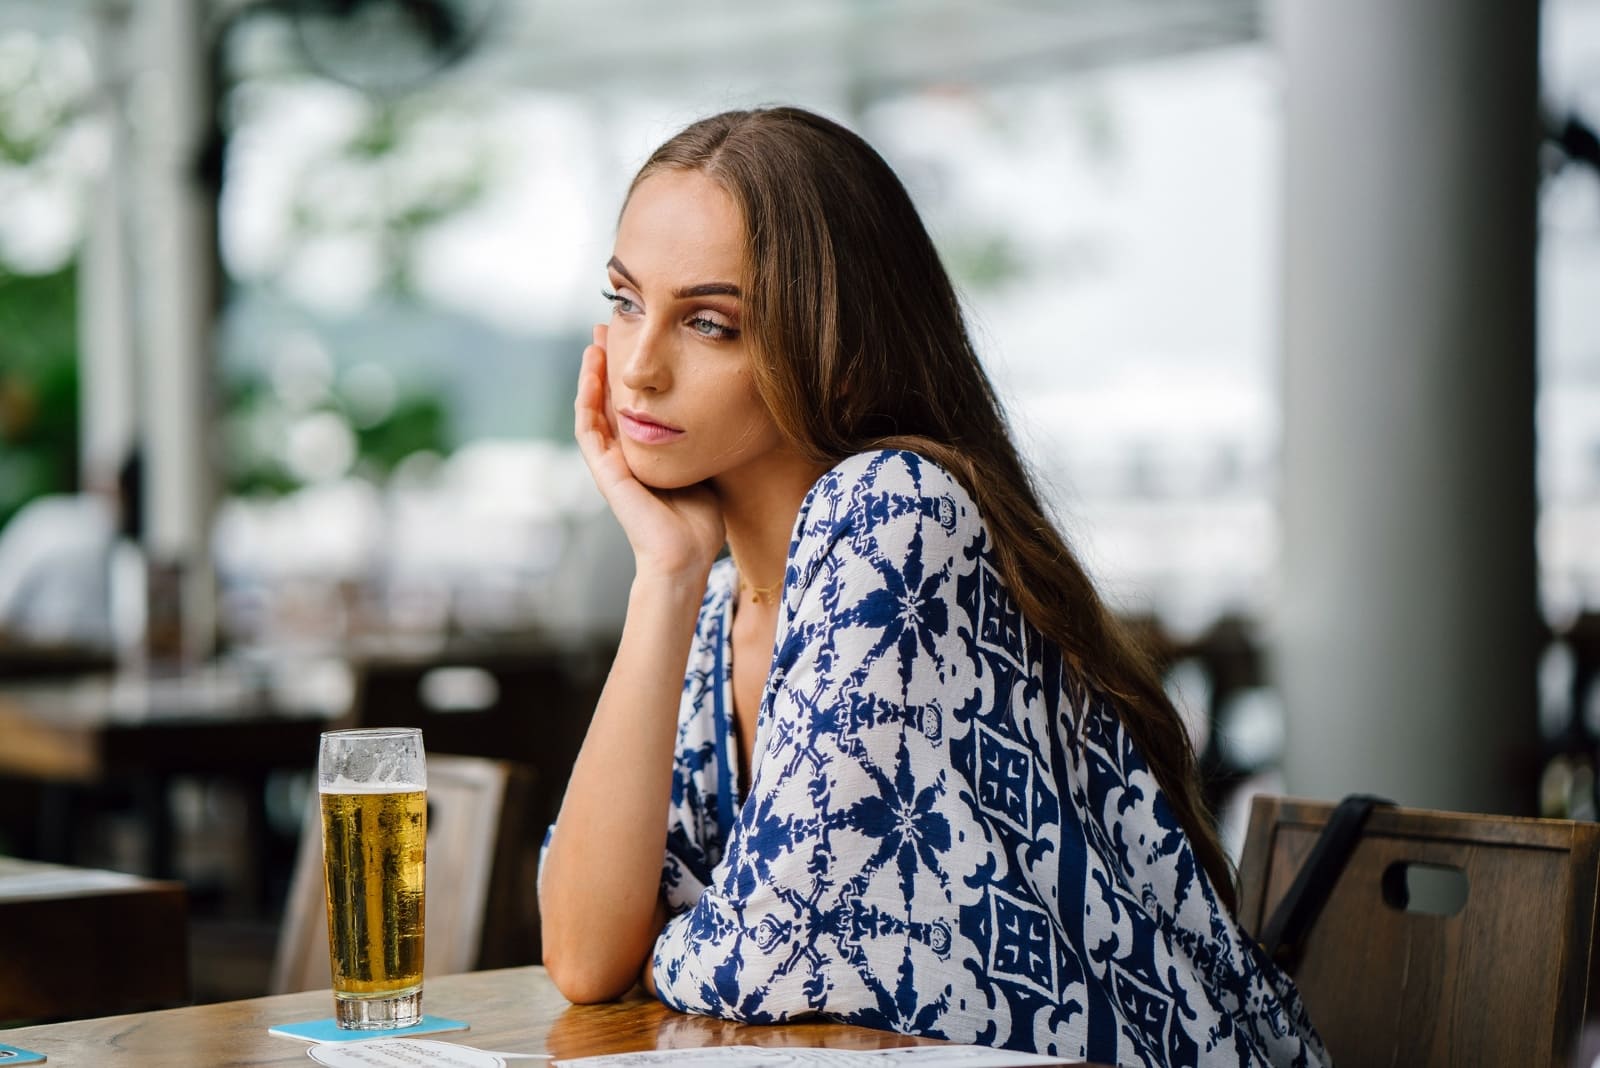 pensive woman in white and blue top sitting at table